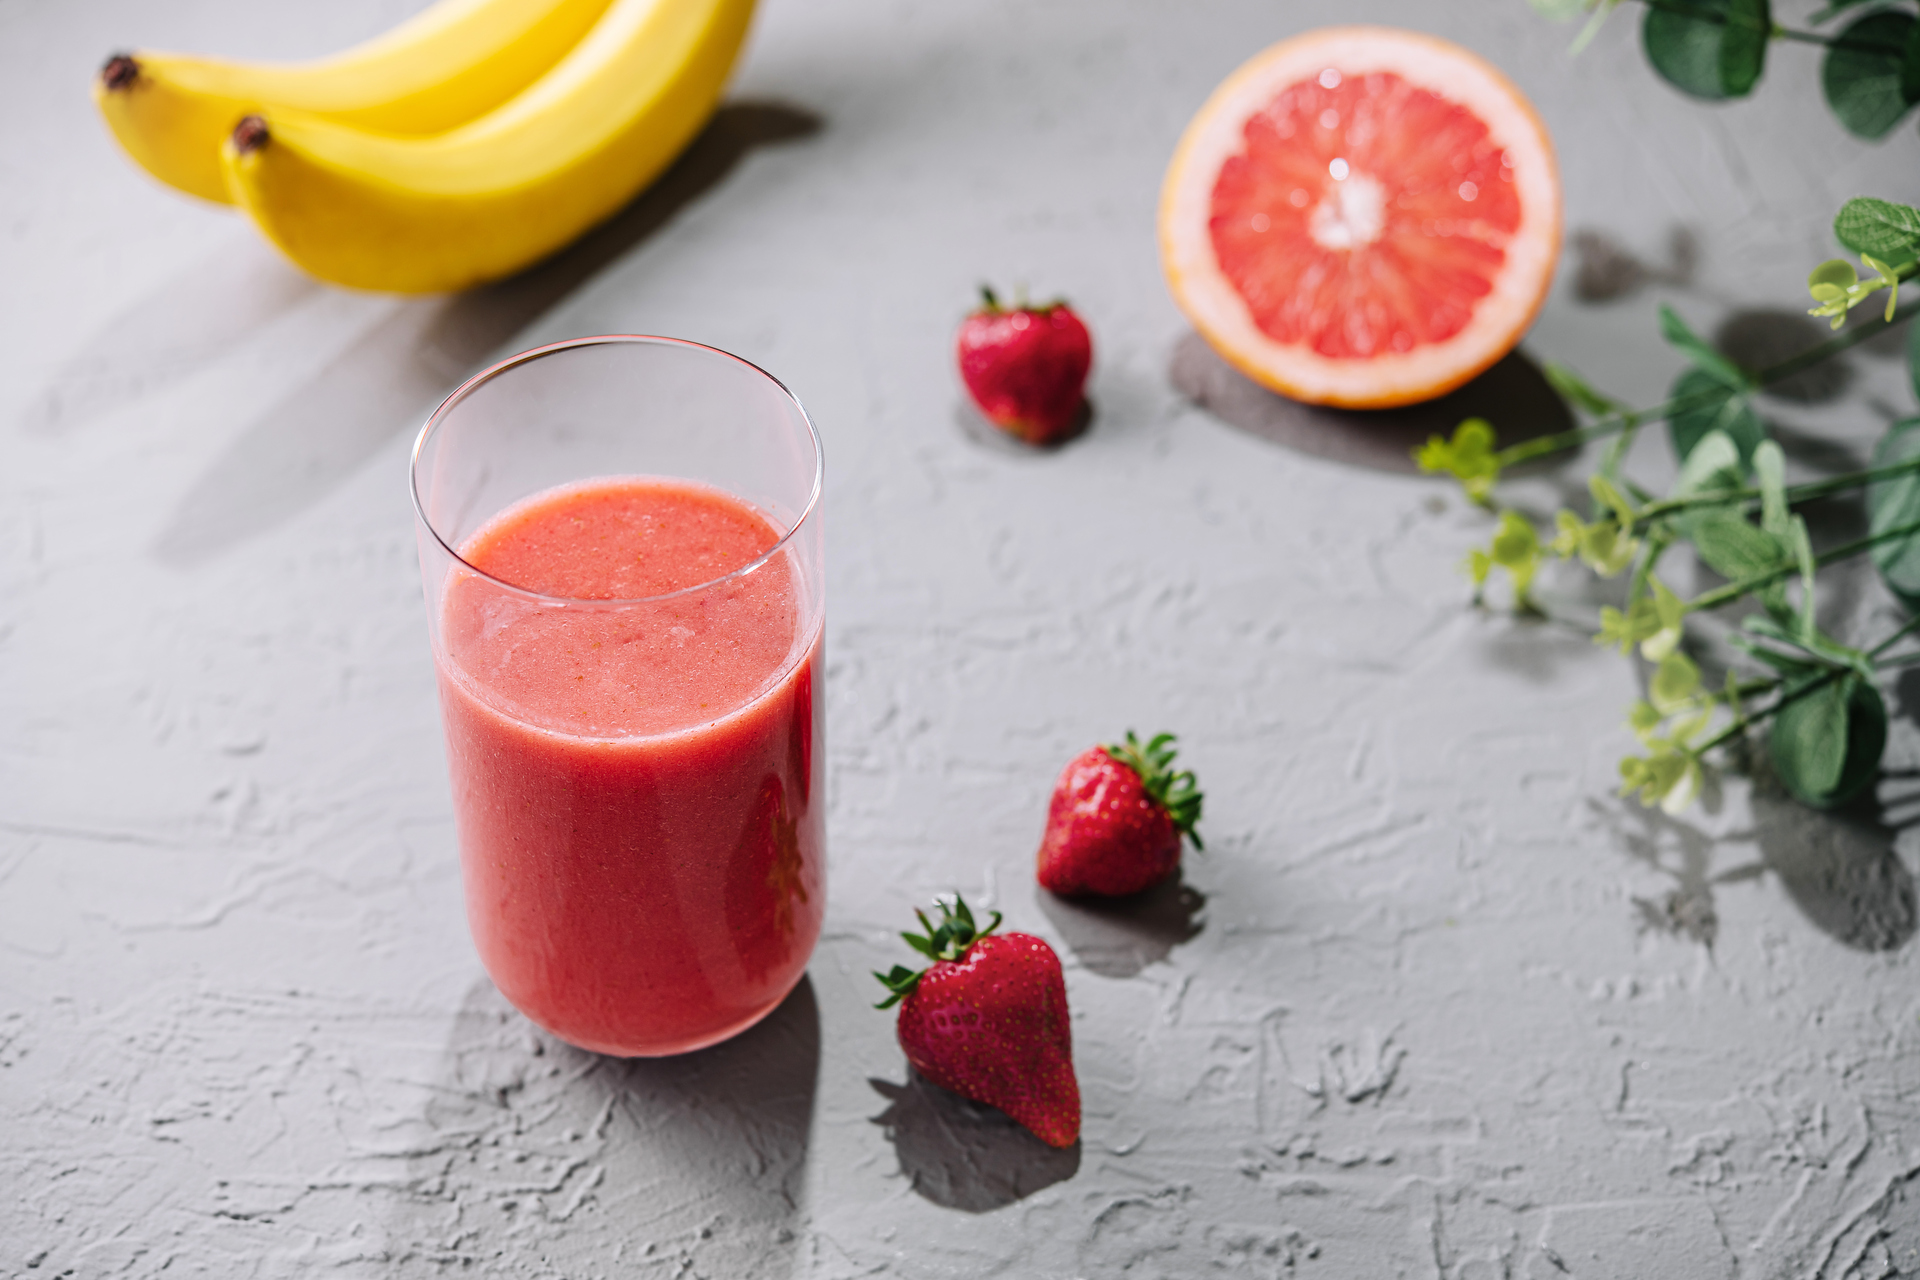 Grapefruit Strawberry Smoothie for Losing Weight